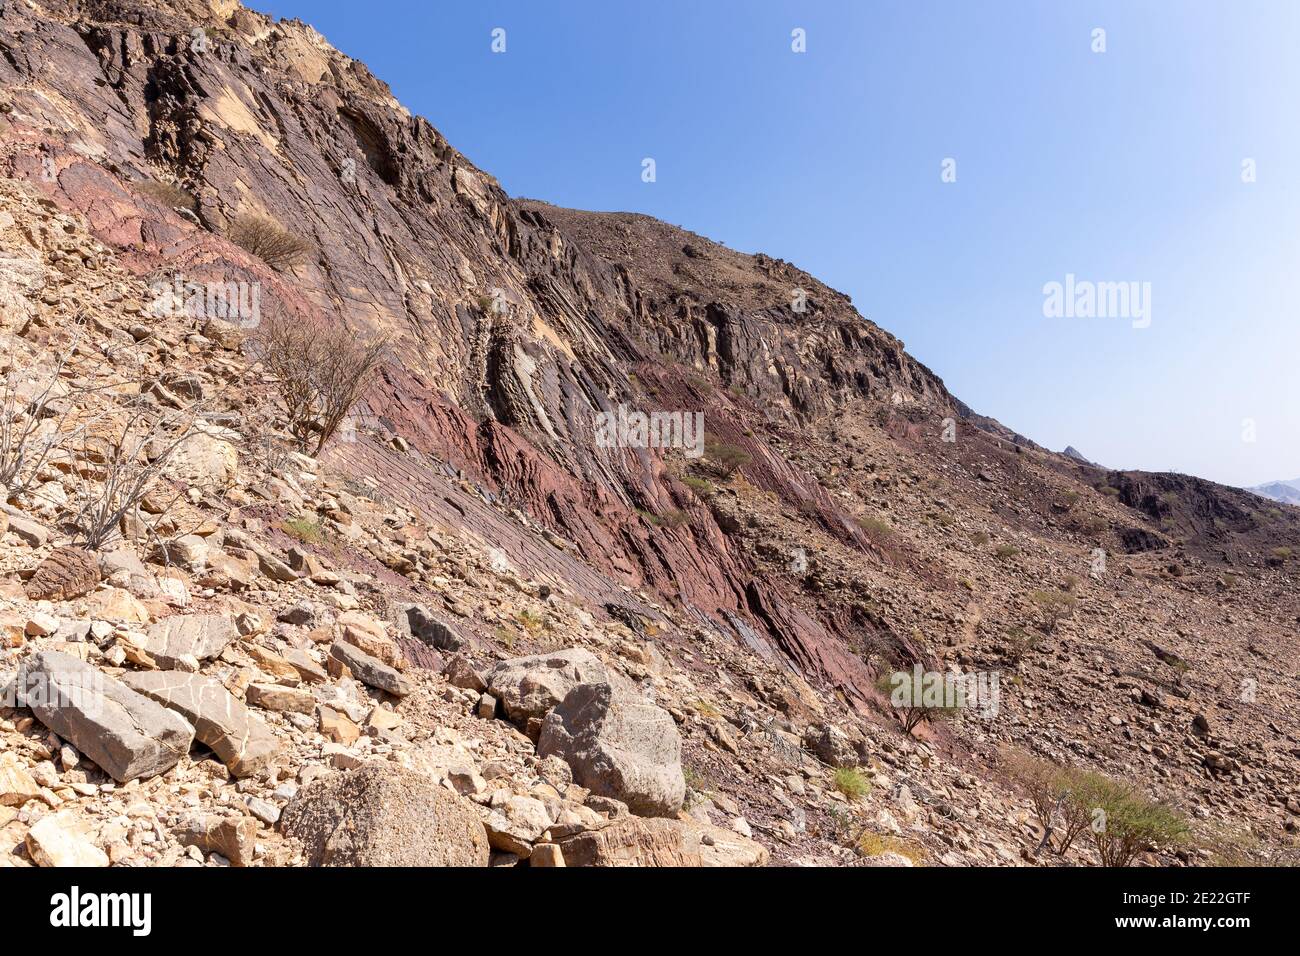 Hajar Mountains landscape, with limestone and dolomite rocks, rocky trail and barren trees, United Arab Emirates. Stock Photo